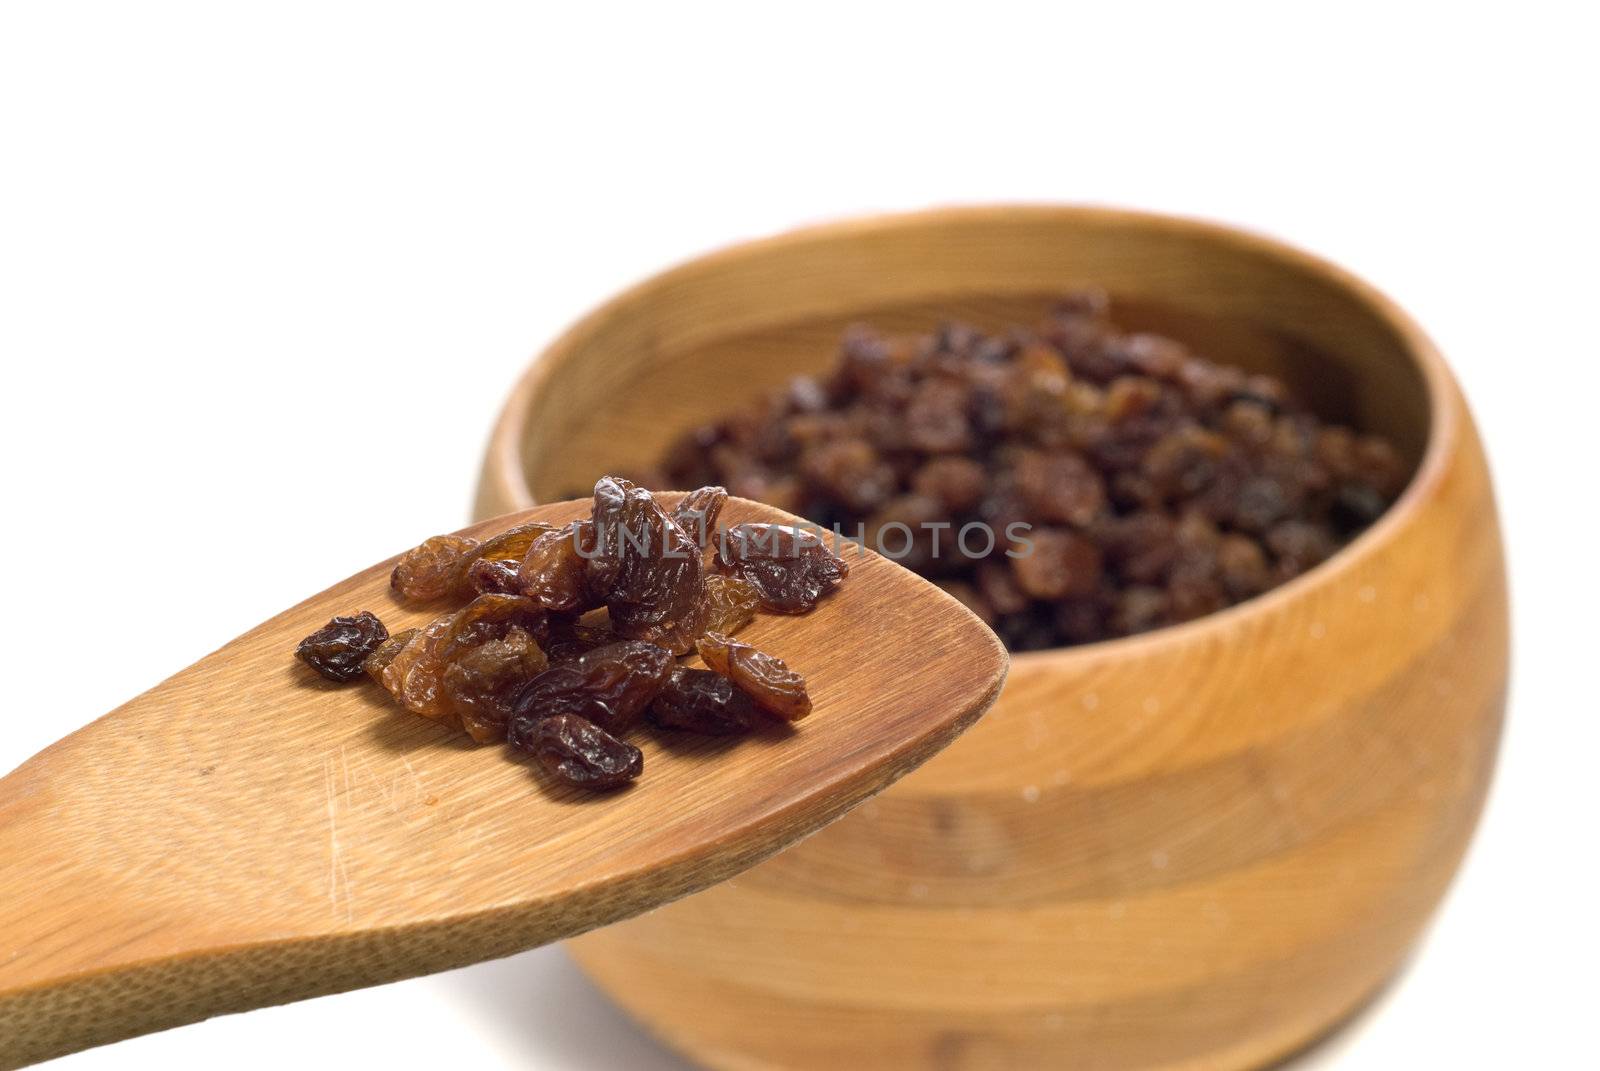 A wooden spoon full of raisins show of an ingredient for cookies or something, shot on white